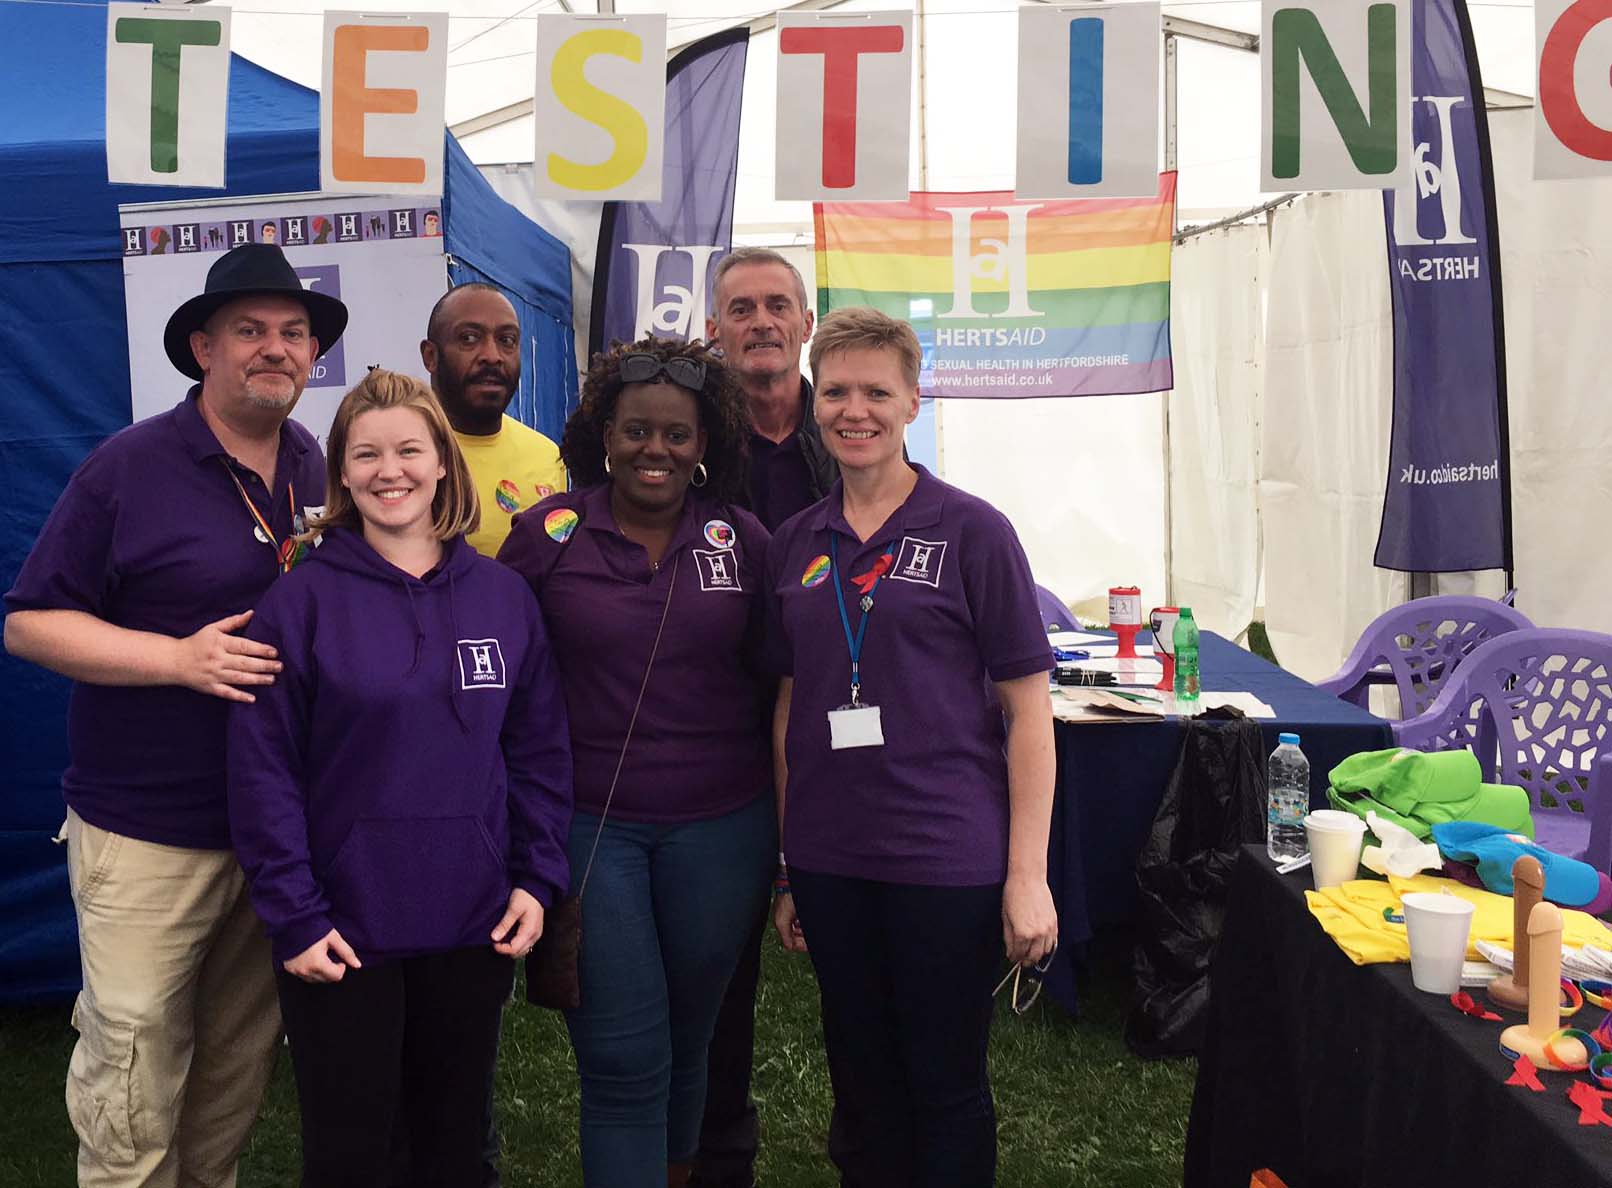 HertsAid offering HIV testing